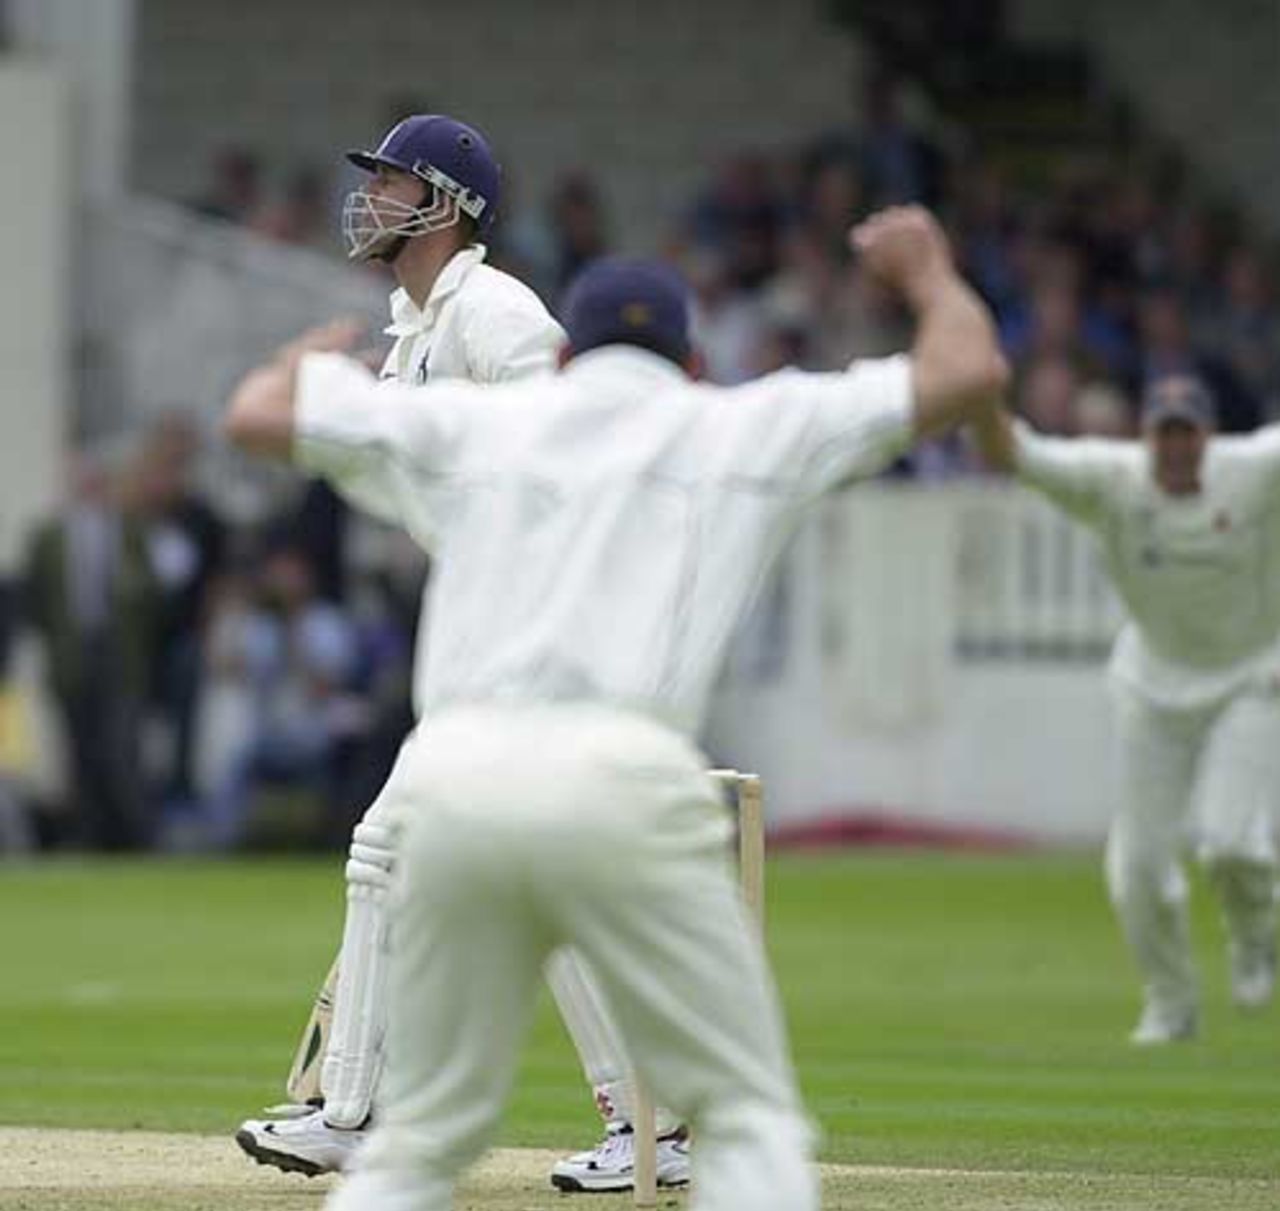 Nick Knight knows he has been caught out behind for 9, Essex v Warwickshire, B and H Cup Final, Lord's, 22 July 2002